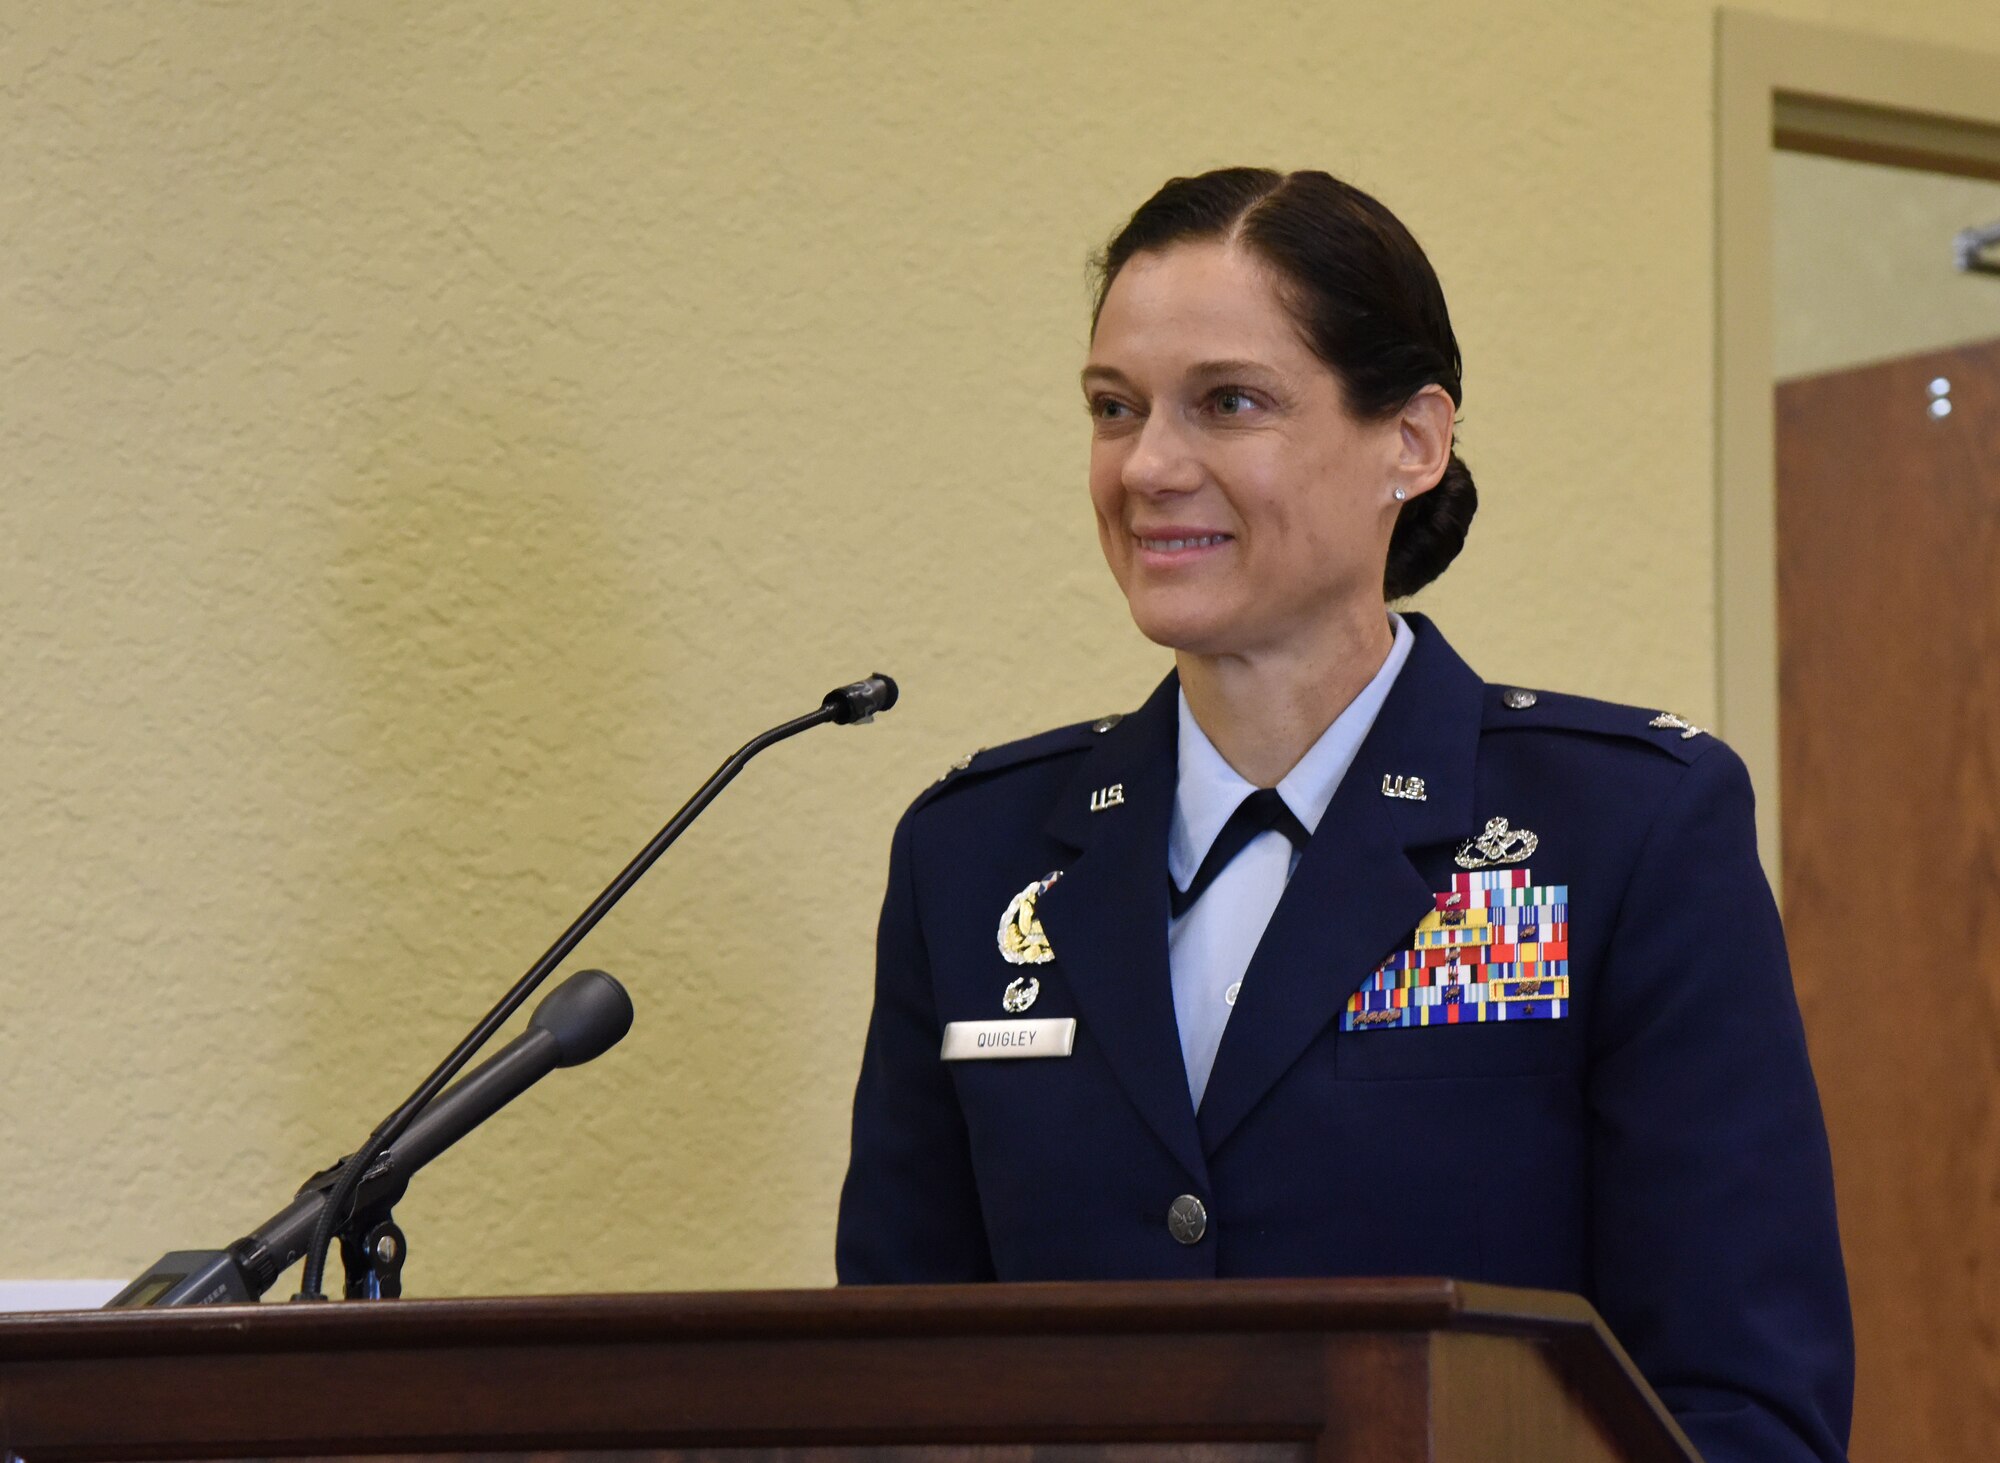 U.S. Air Force Col. Marcia Quigley, 81st Mission Support Group commander, delivers remarks during the 81st MSG change of command ceremony in the Bay Breeze Event Center at Keesler Air Force Base, Mississippi, July 19, 2018. Quigley assumed command from Col. Danny Davis, outgoing 81st MSG commander. (U.S. Air Force photo by Kemberly Groue)